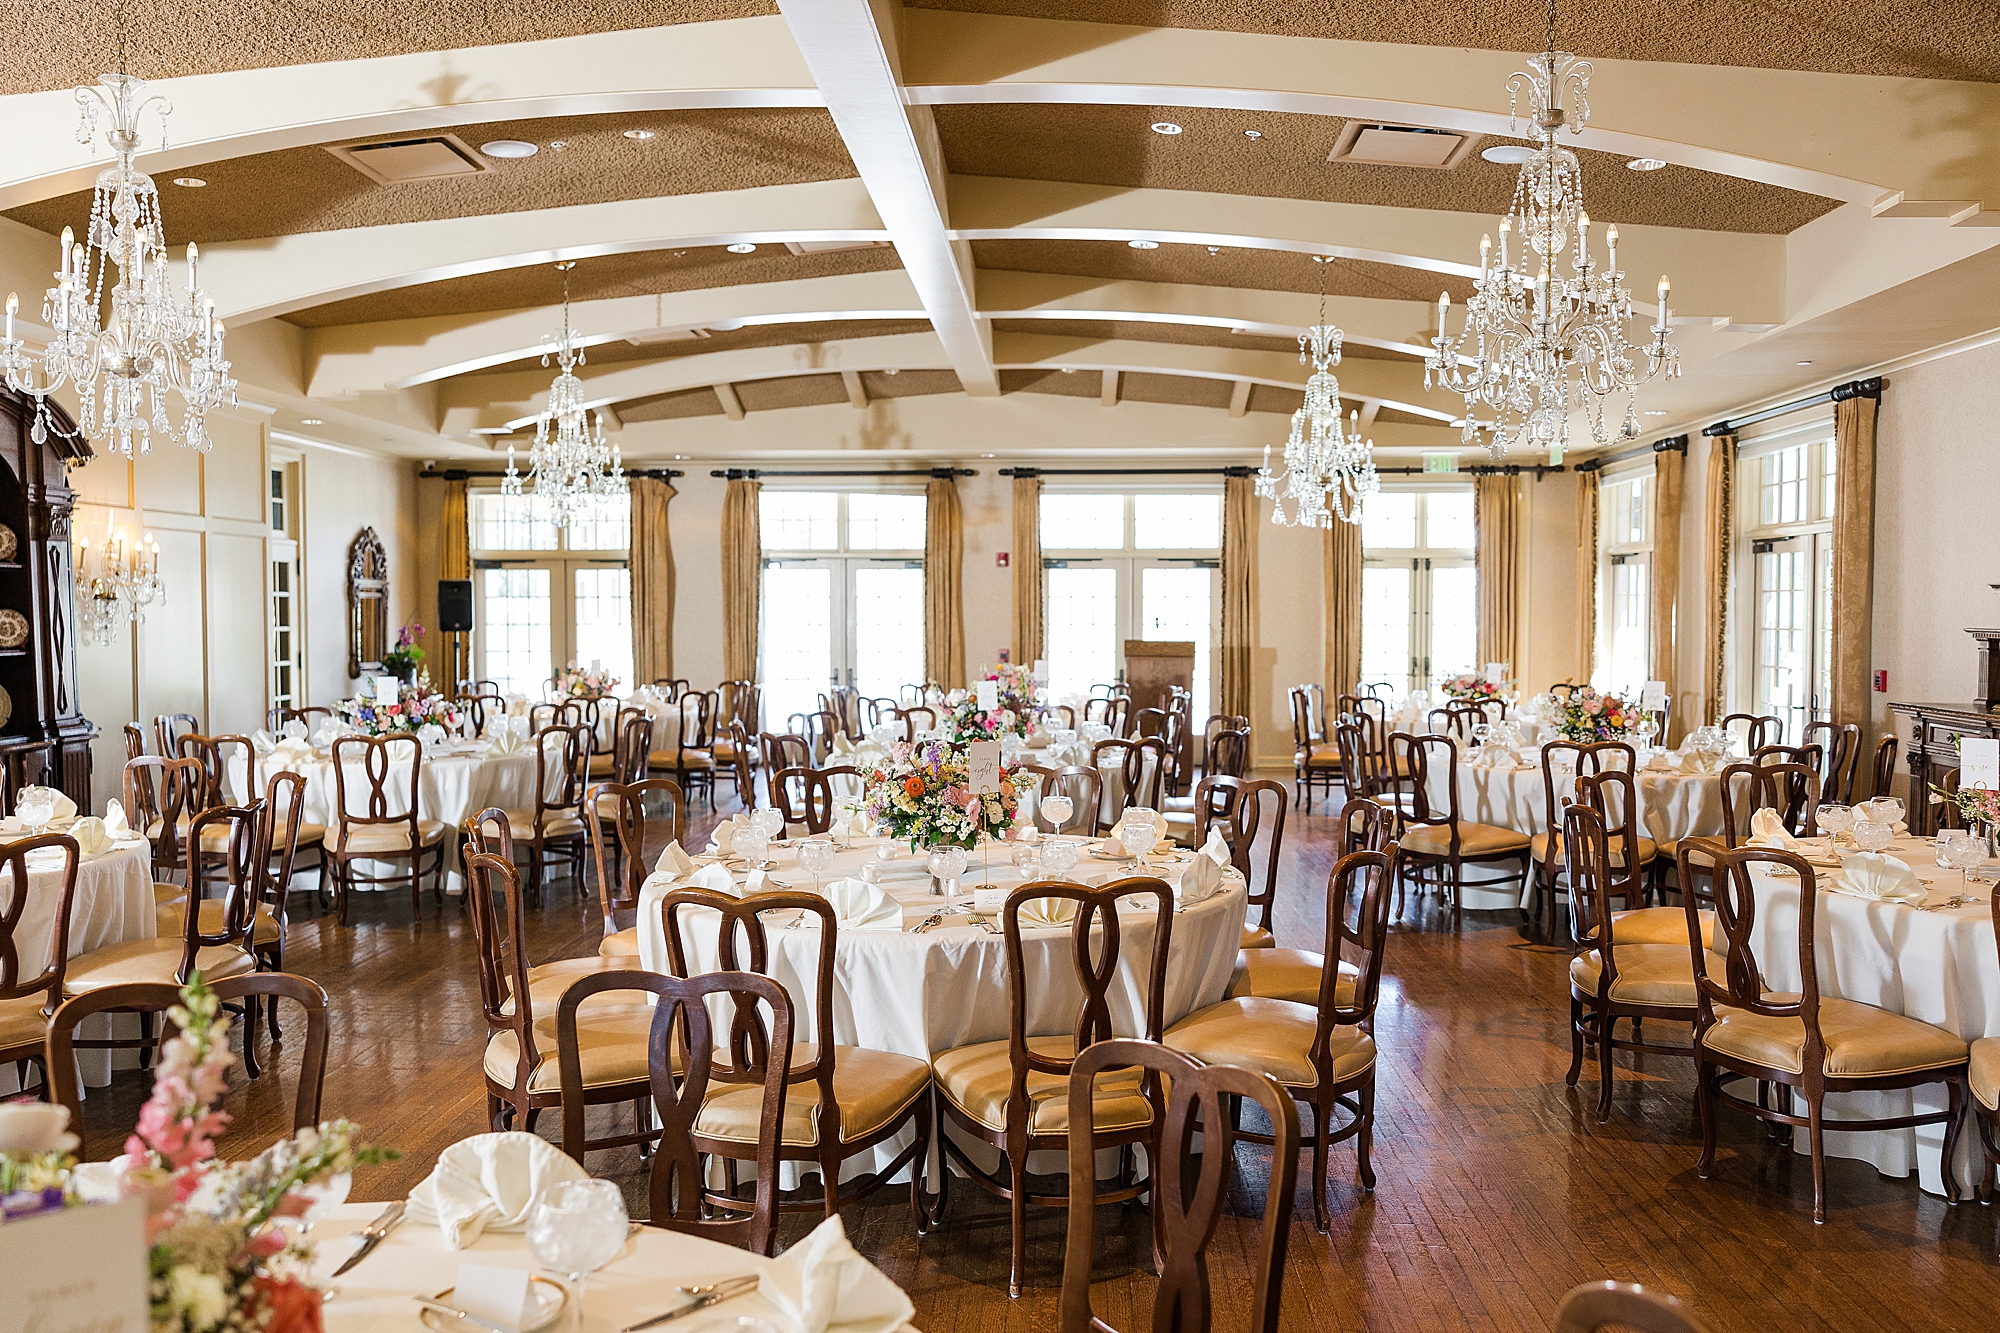 The grand reception hall at a country club in Salt Lake City